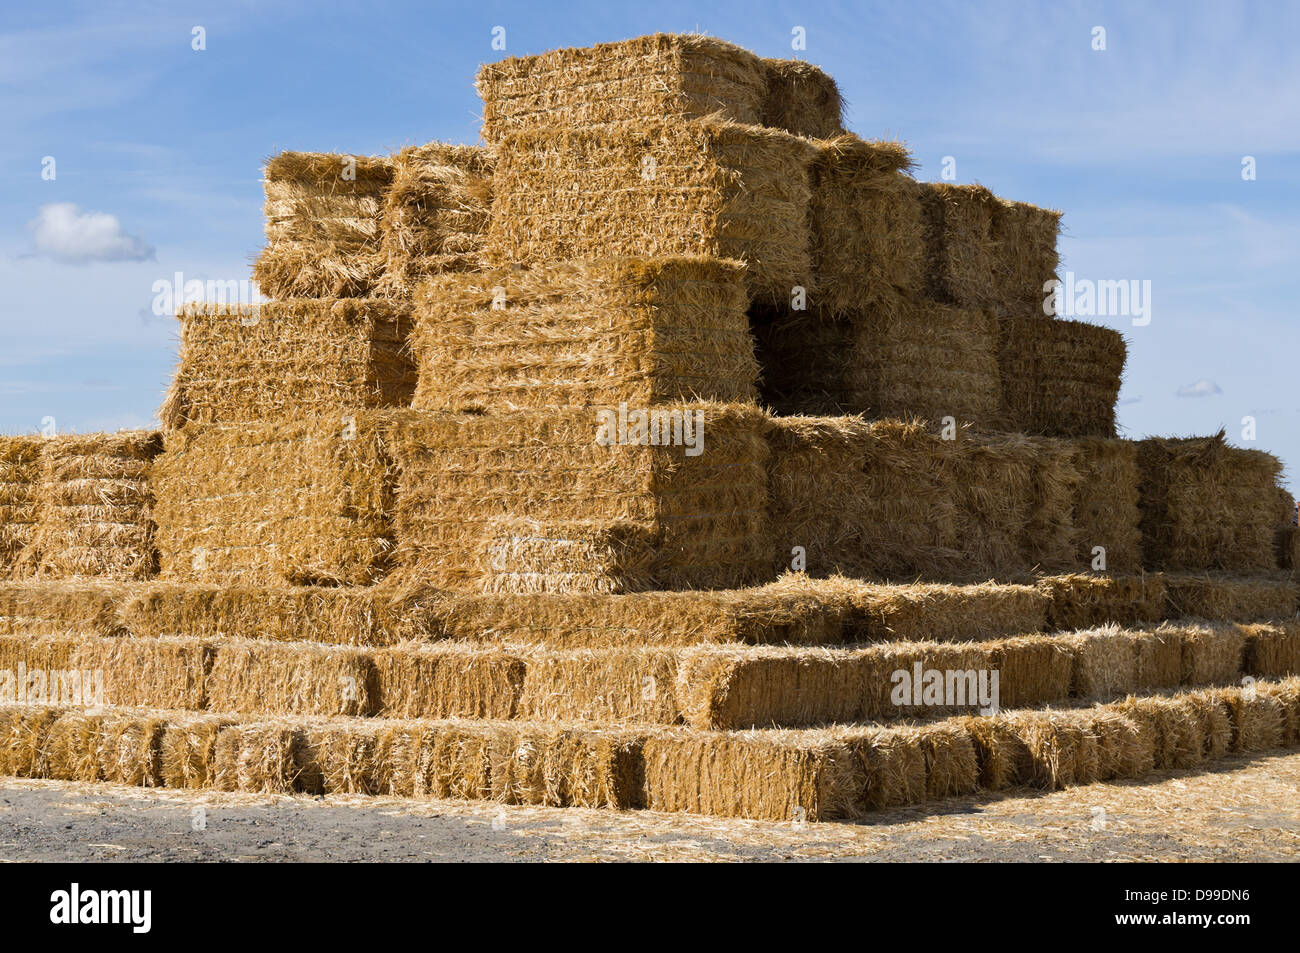 A large stack of square hay bales ready for transport Stock Photo